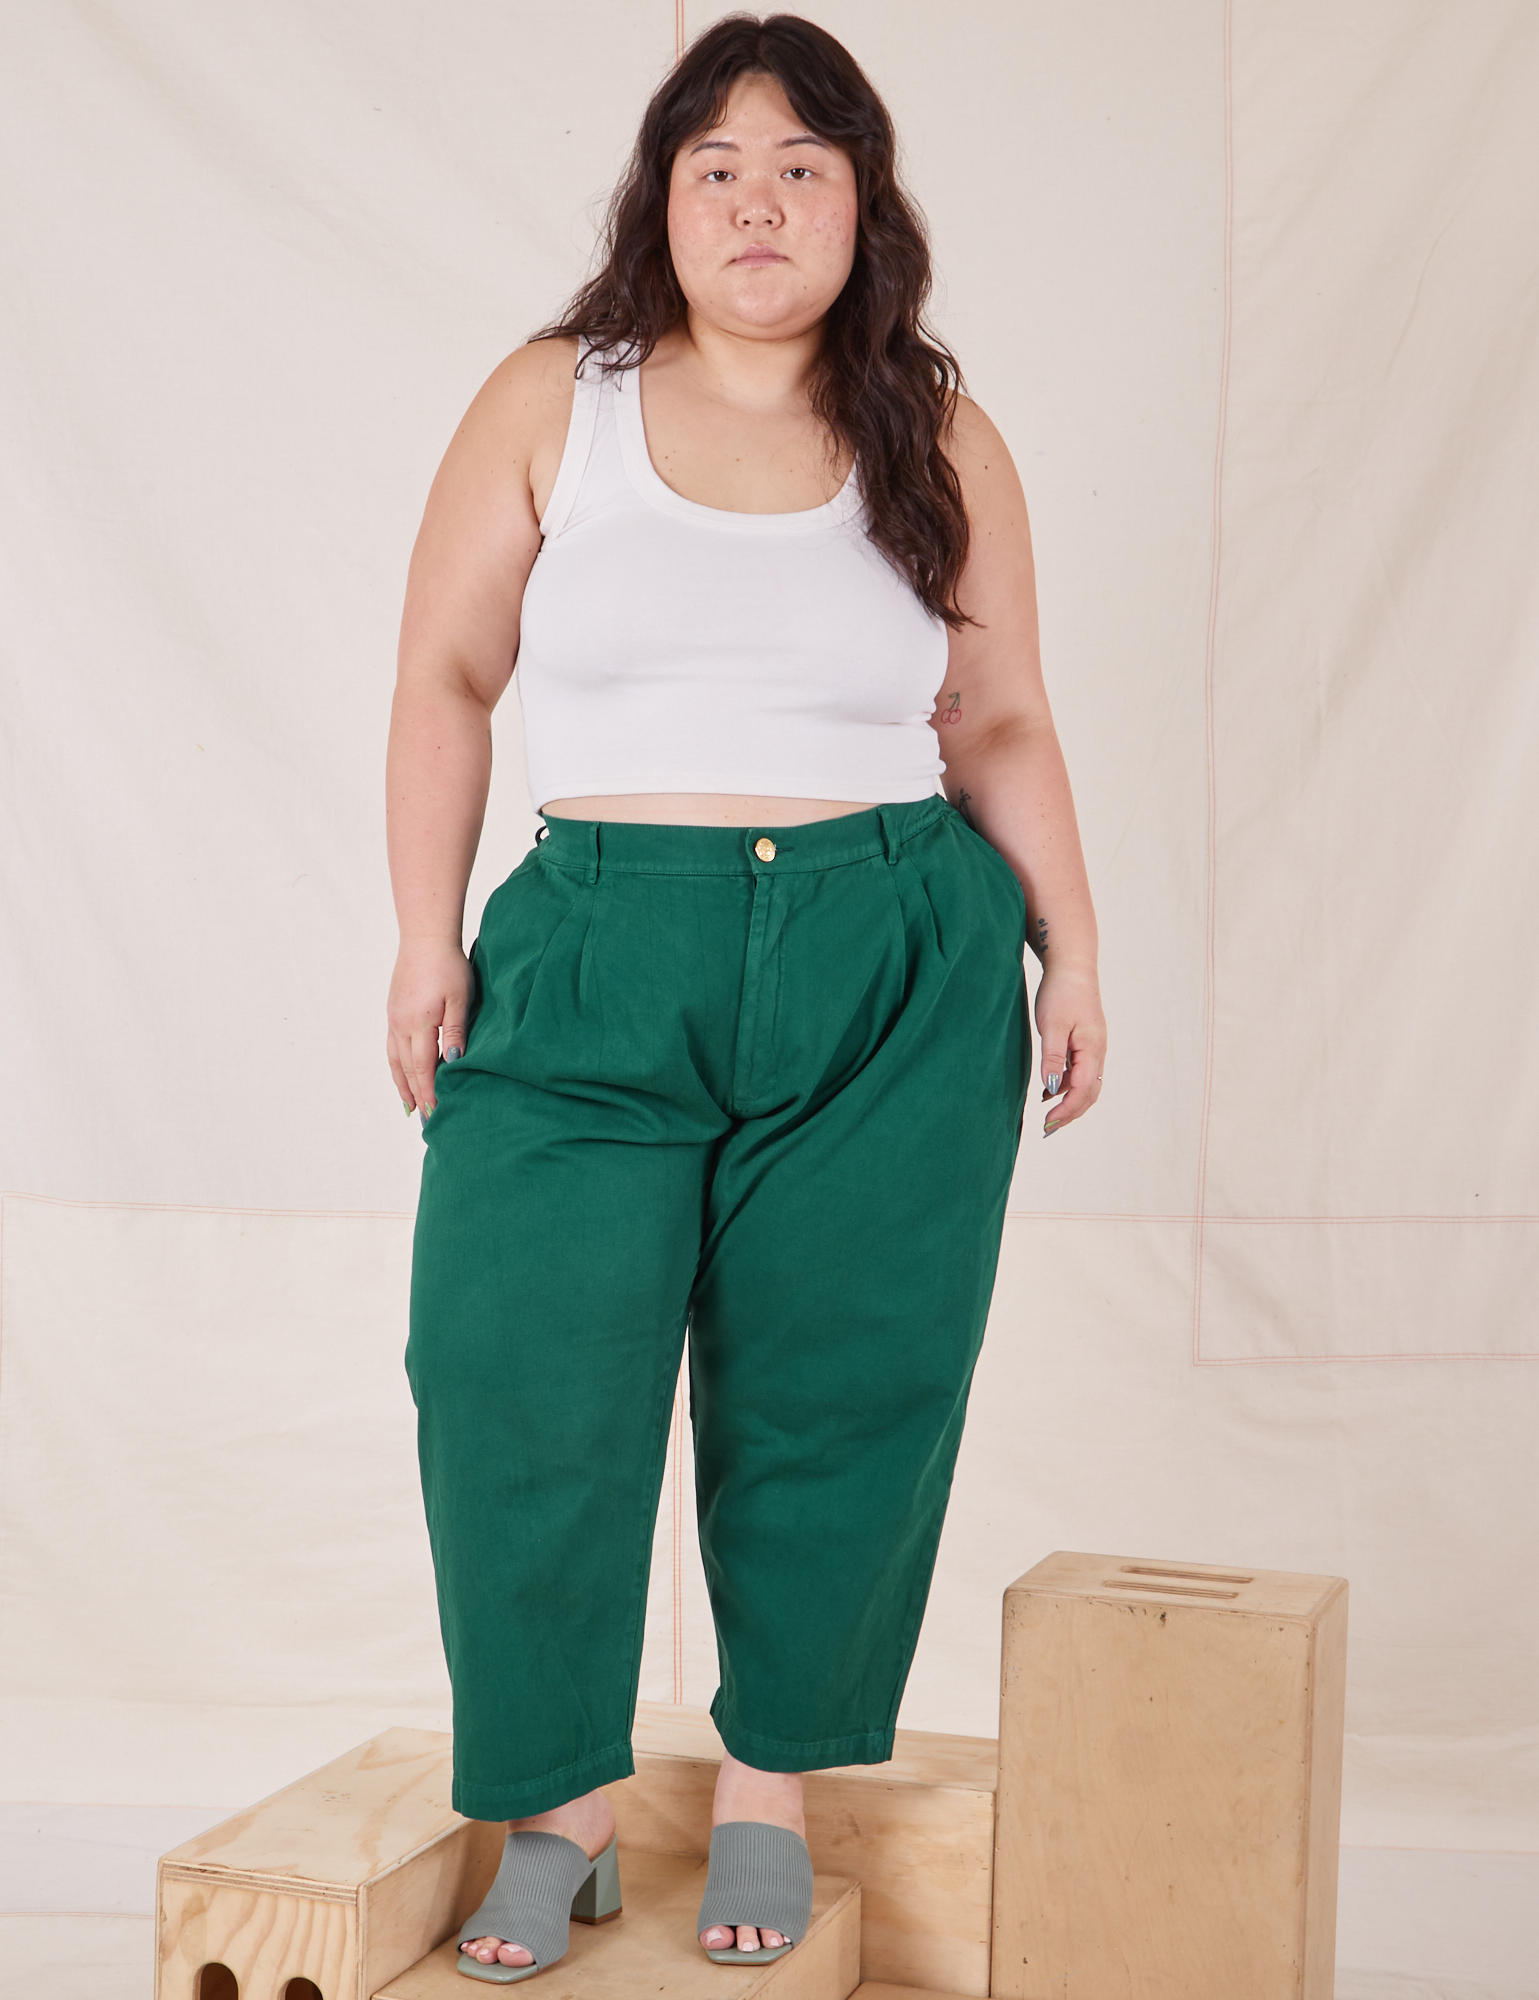 Ashley is 5&#39;7&quot; and wearing 1XL Petite Heavyweight Trousers in Hunter Green paired with vintage off-white Cropped Tank Top